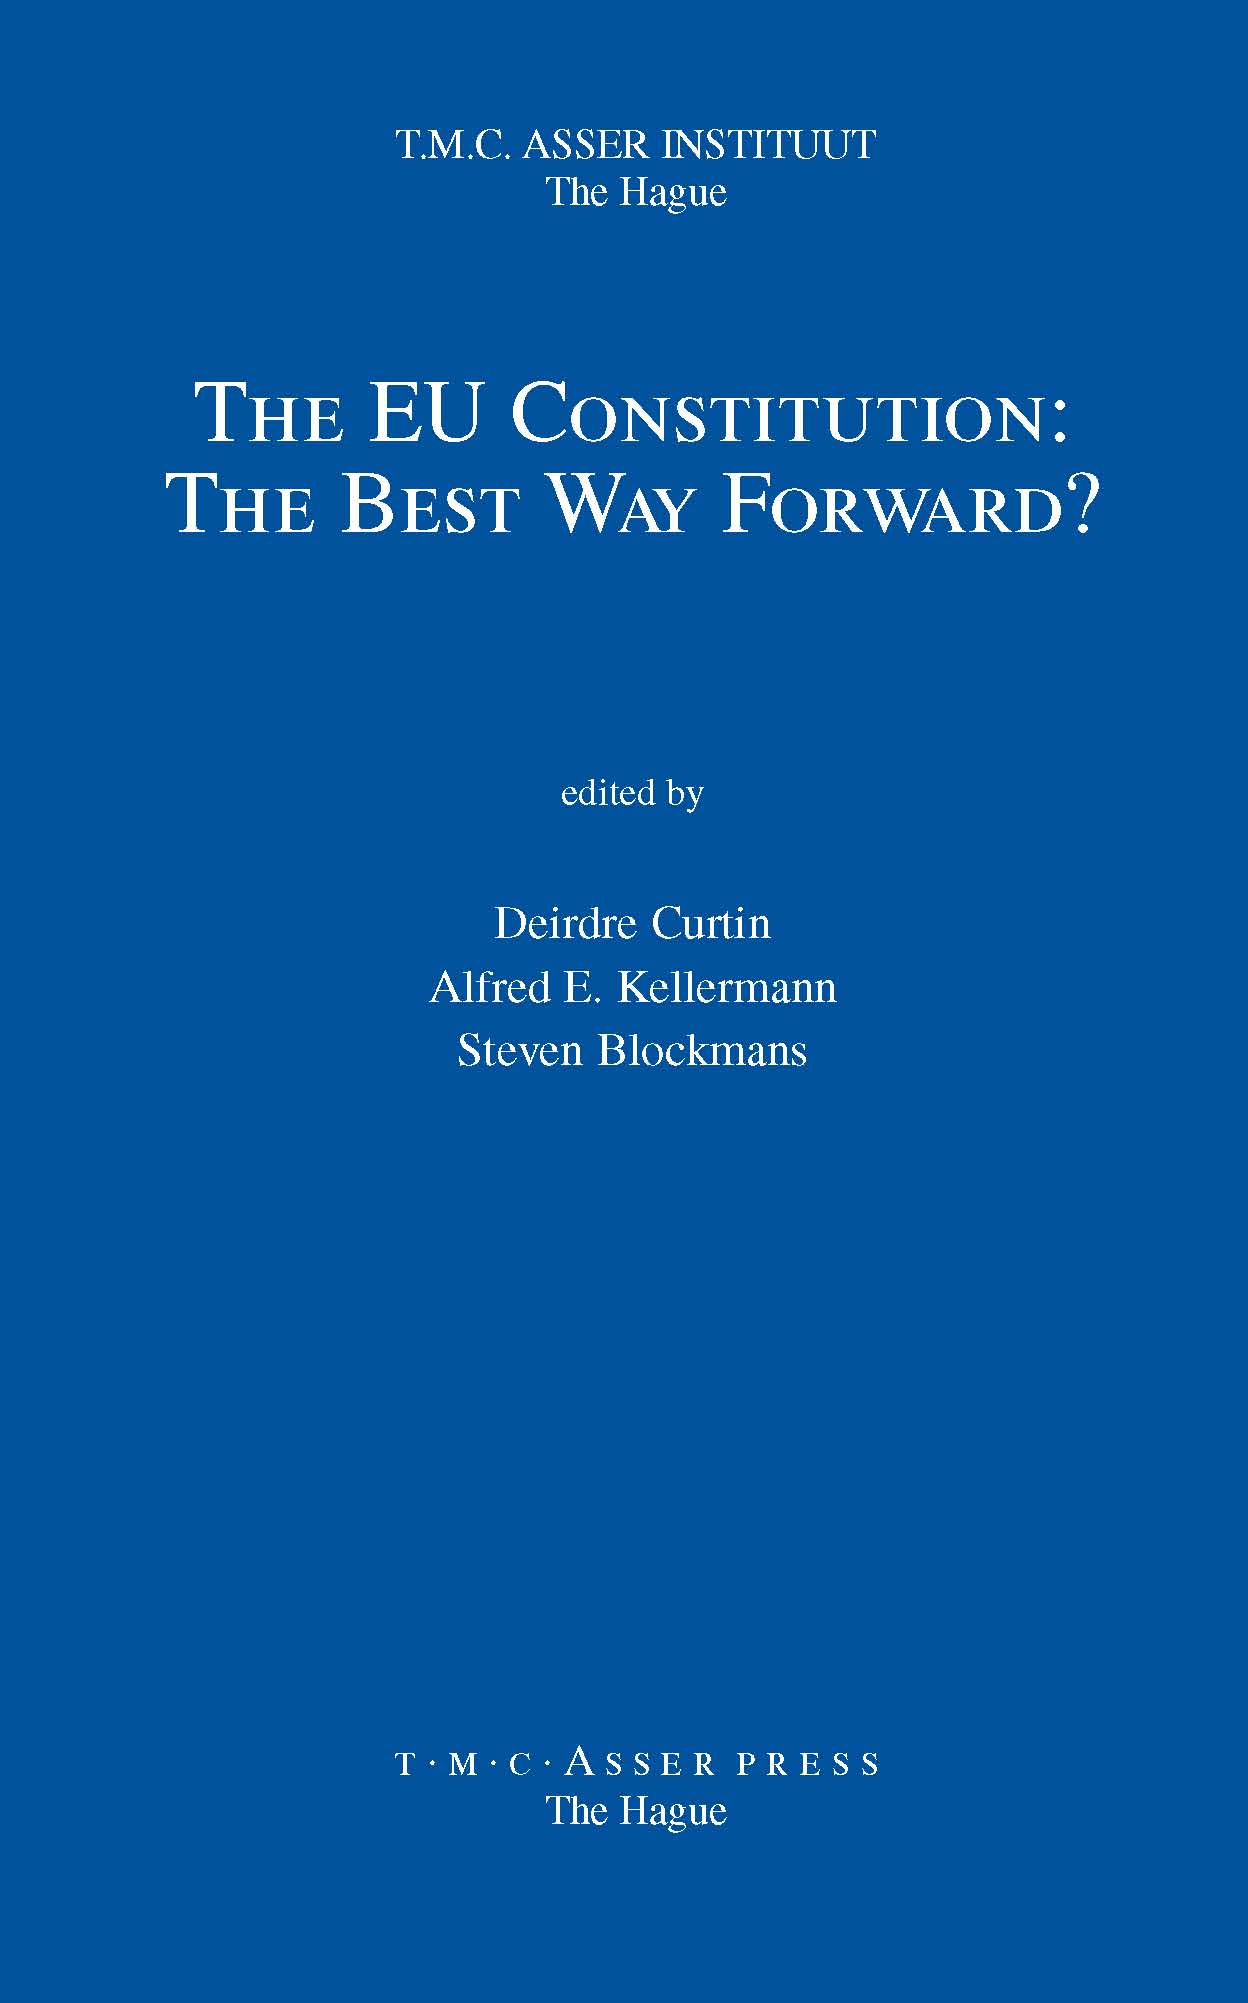 The EU Constitution - The Best Way Forward?